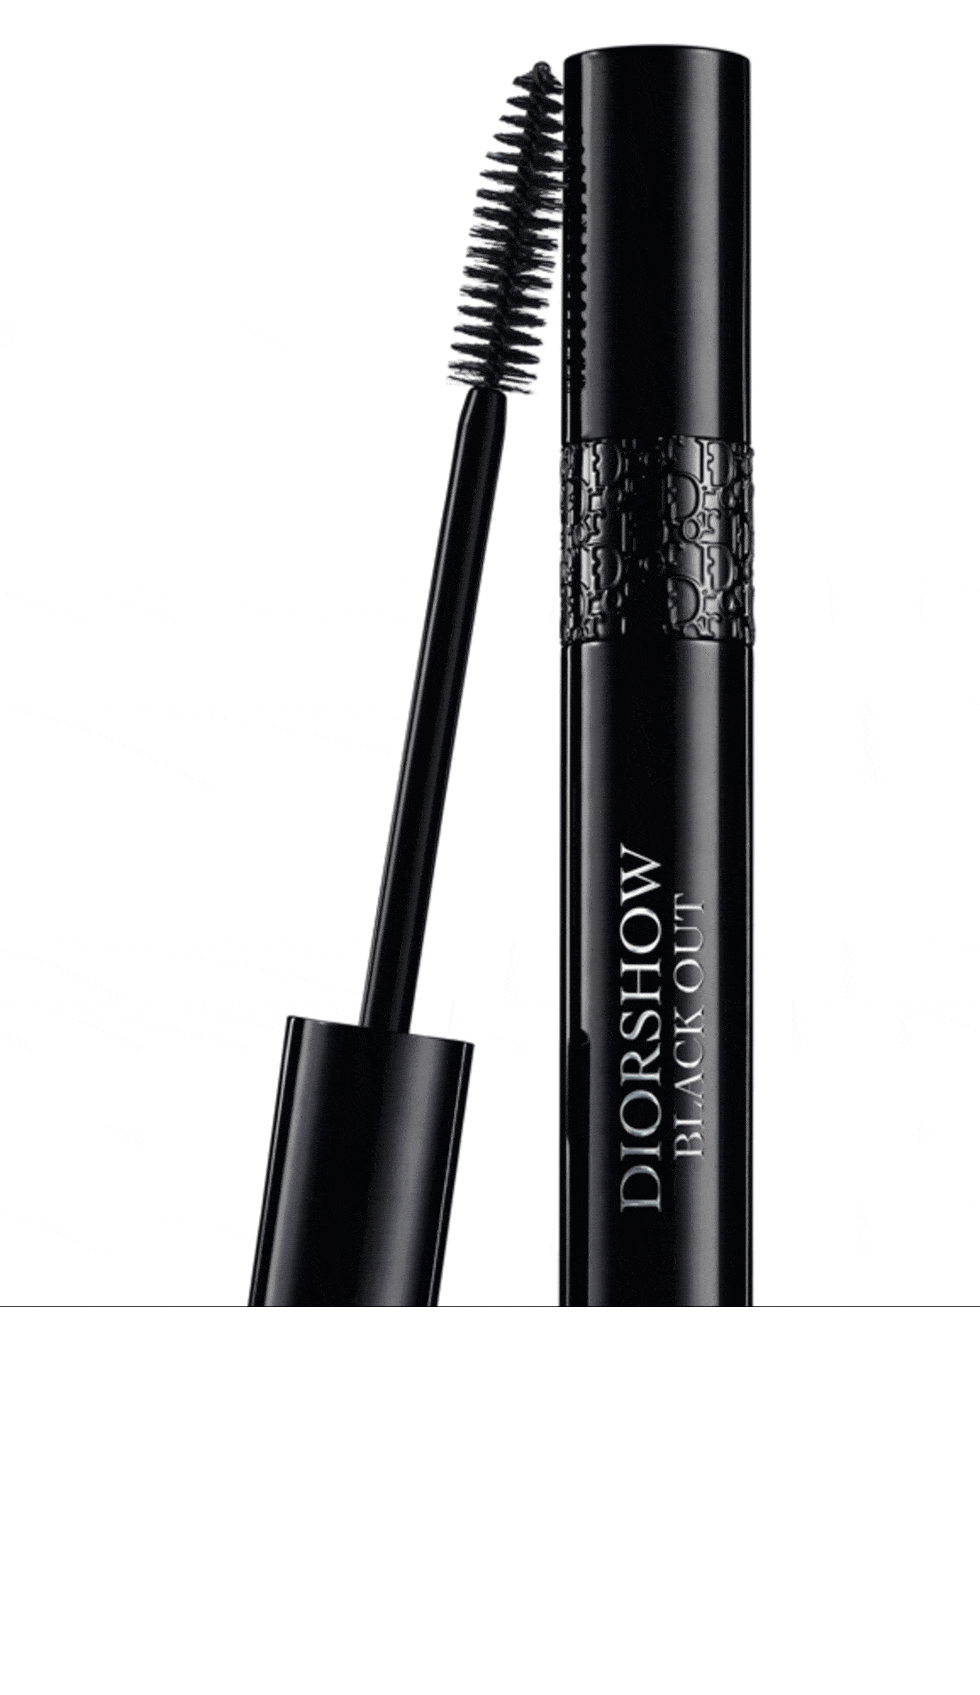 <p><a href="http://www.debenhams.com/webapp/wcs/stores/servlet/prod_10701_10001_123172202999_-1" target="_blank">Dior Diorshow Blackout Mascara, £25</a></p>

<p>Think of this as khol for your lashes. One coat goes a long way thanks to the intense pigments